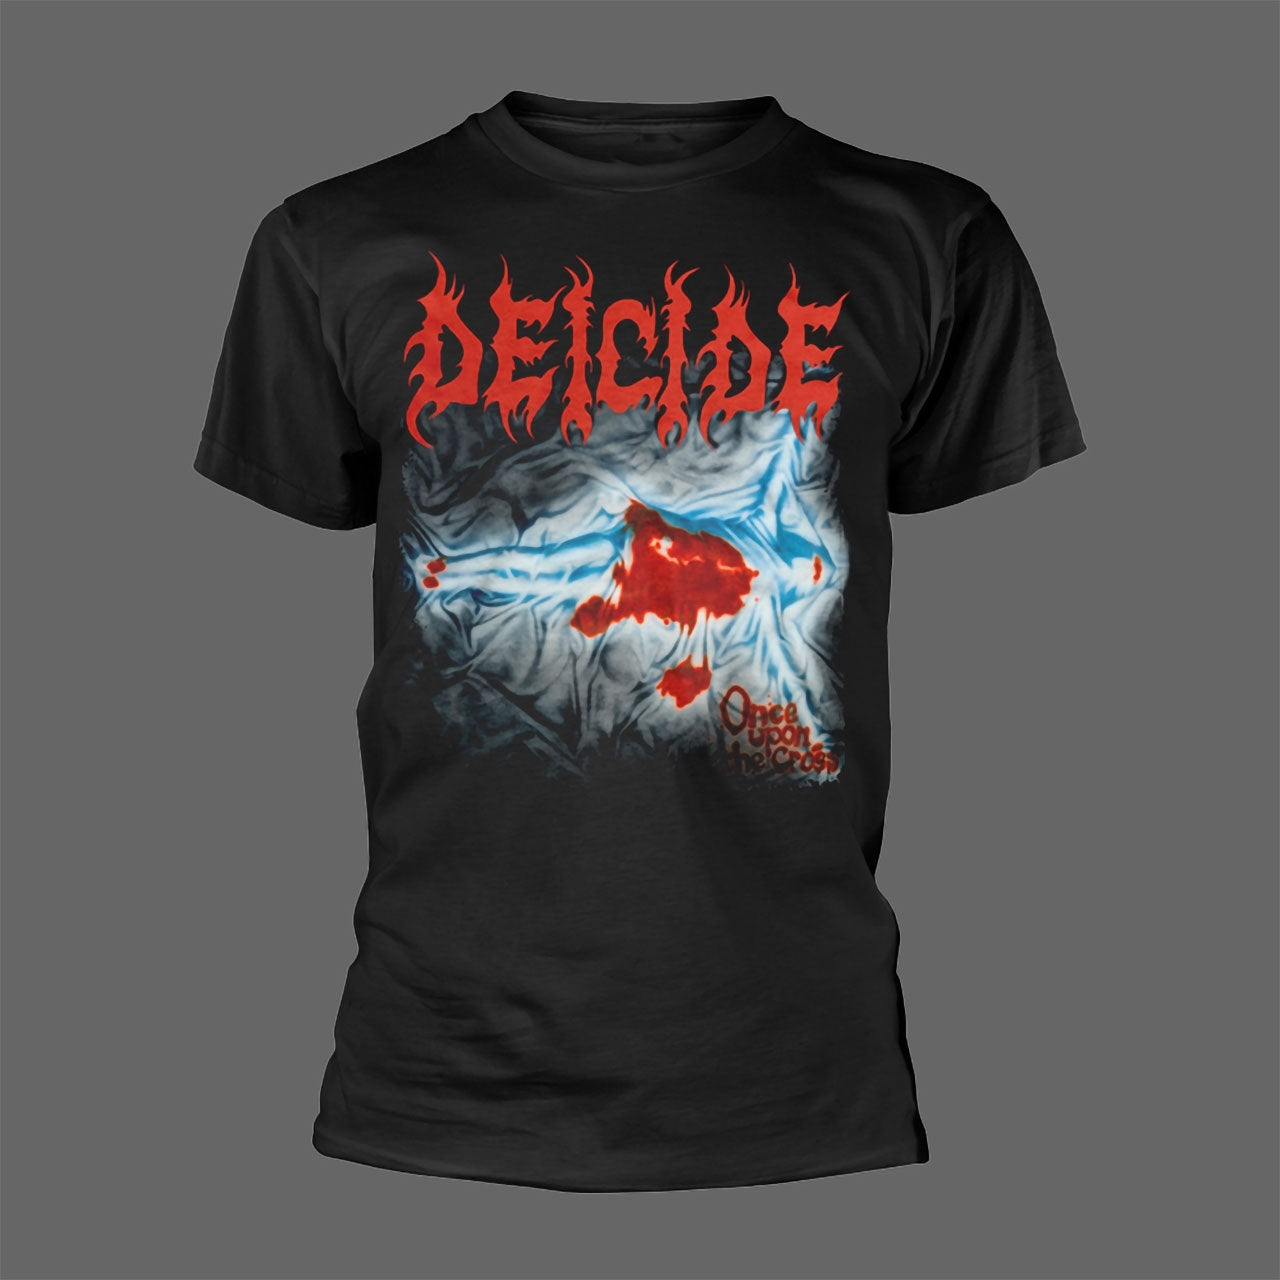 Deicide - Once upon the Cross (T-Shirt)